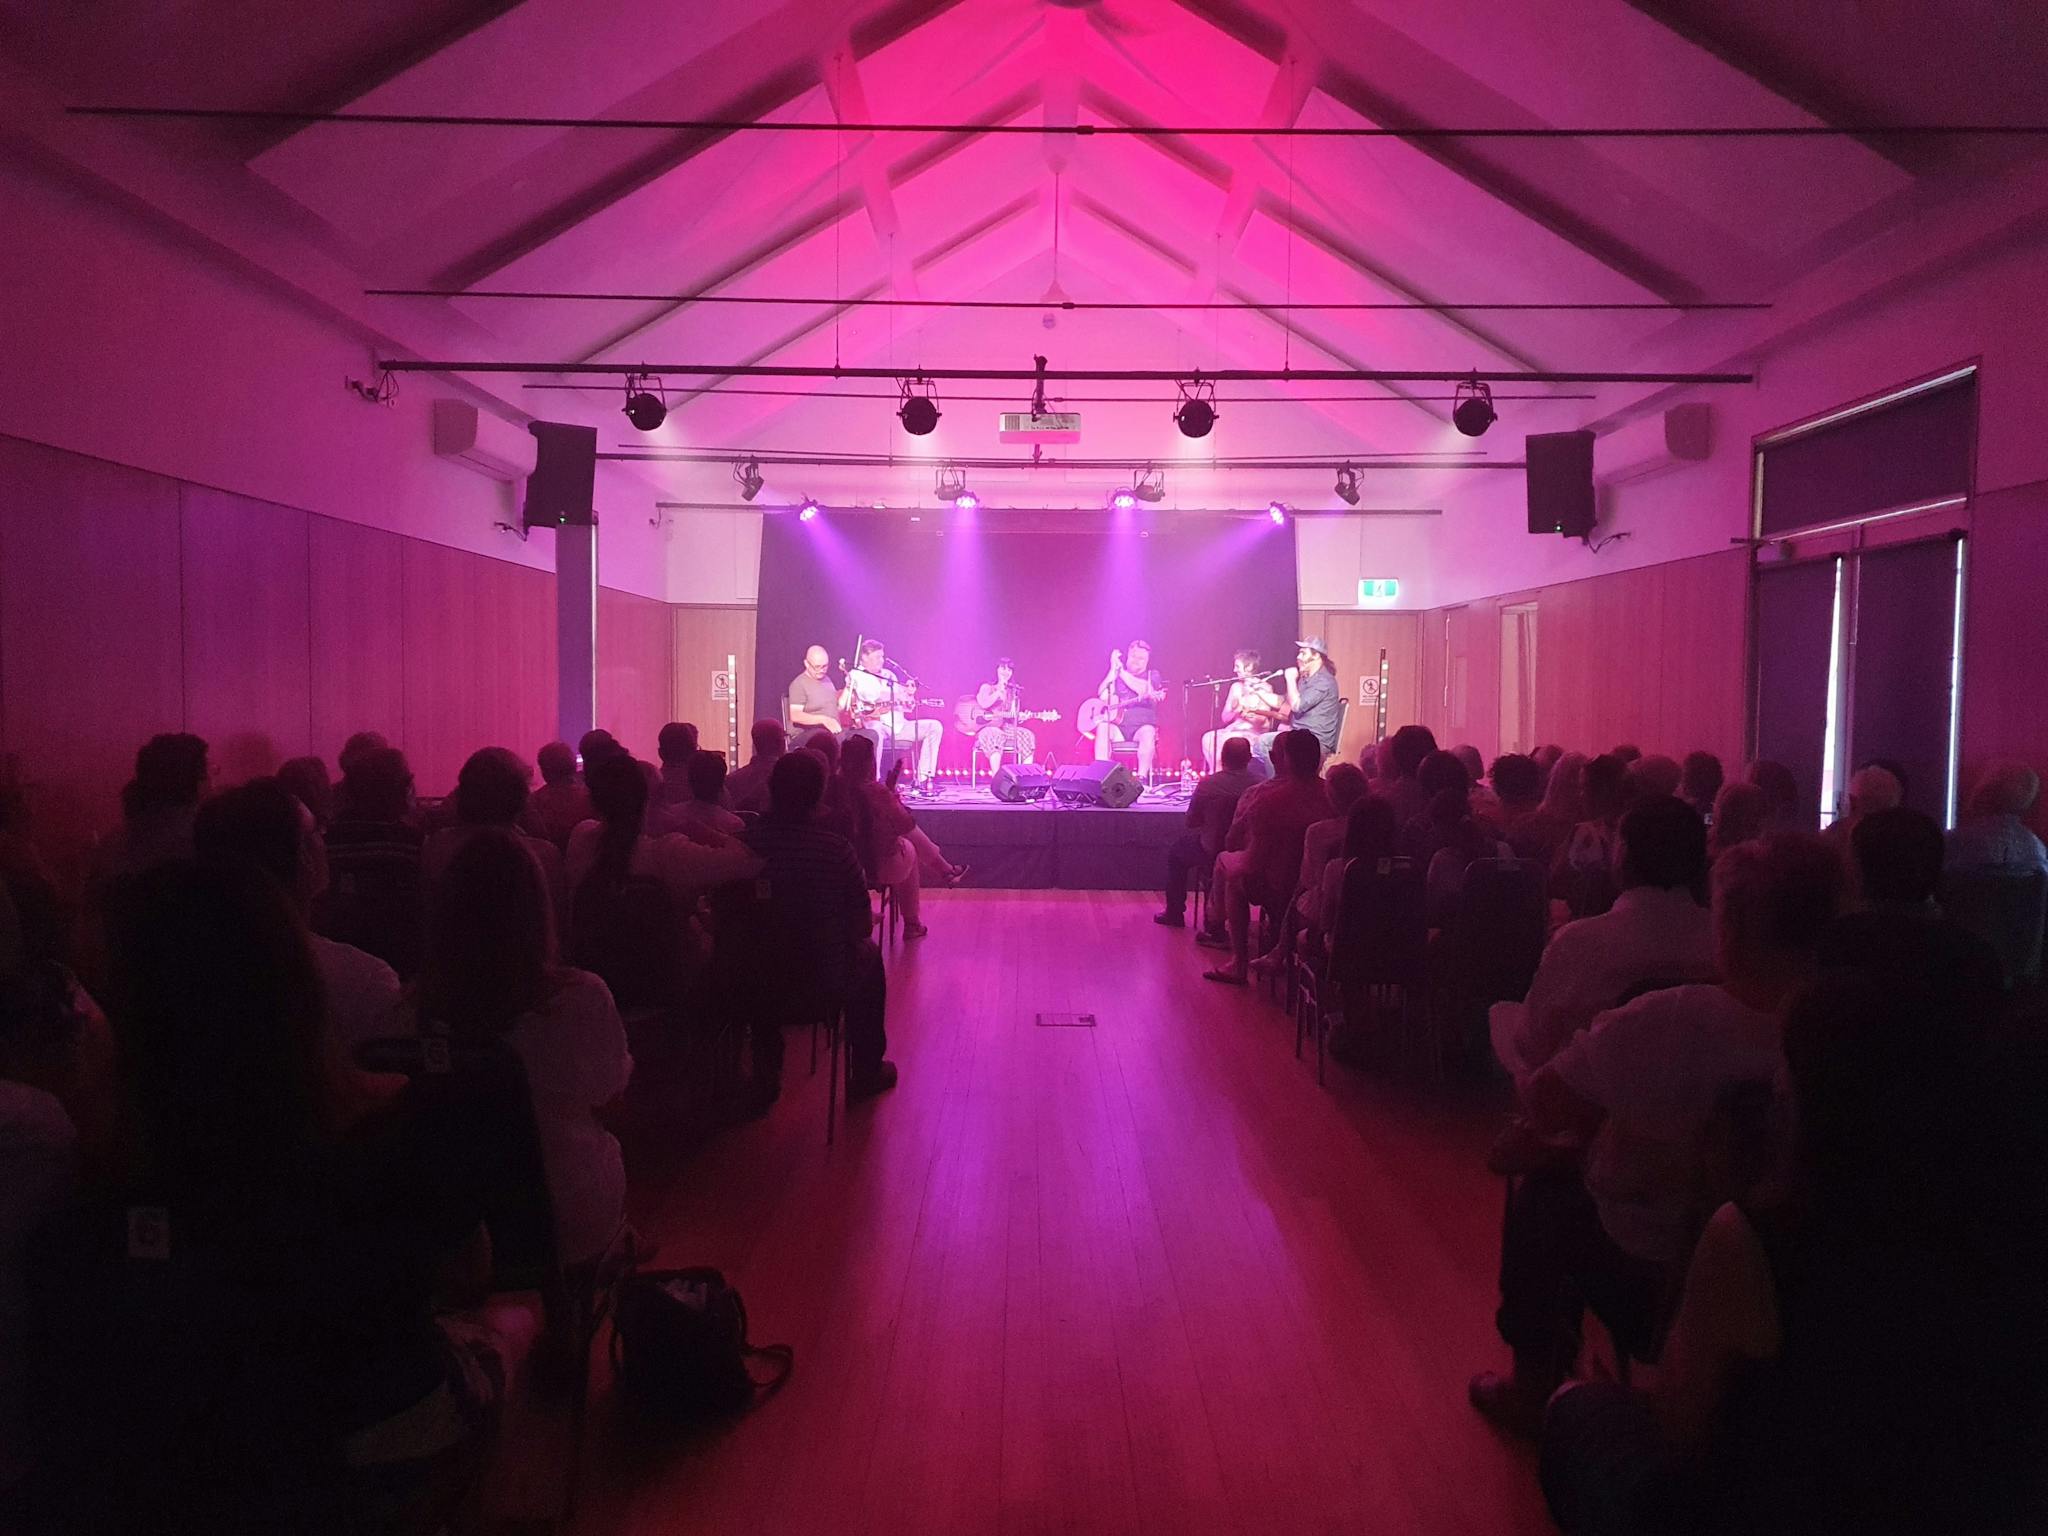 The main space of the hall during a live music event